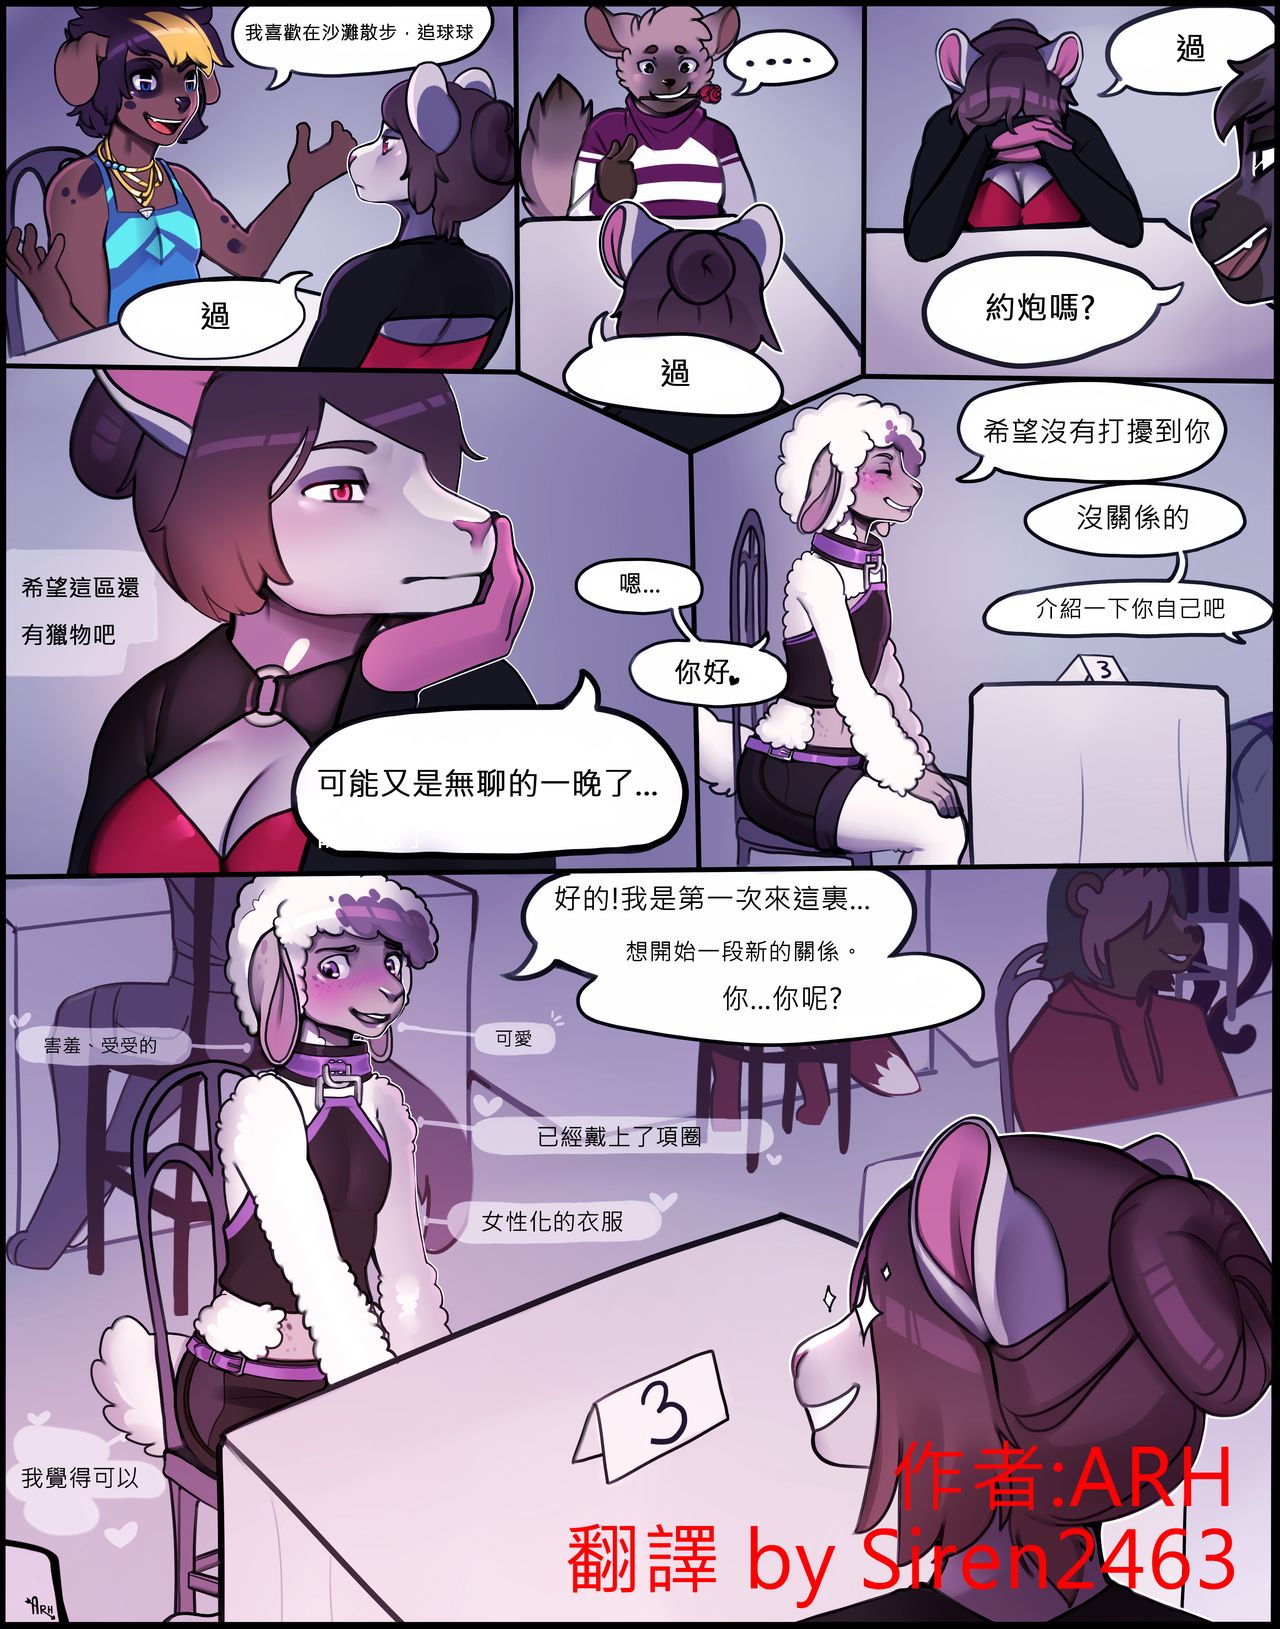 [Arh] HNT Ch. 1 [Ongoing][小賽個人漢化][Chinese] 